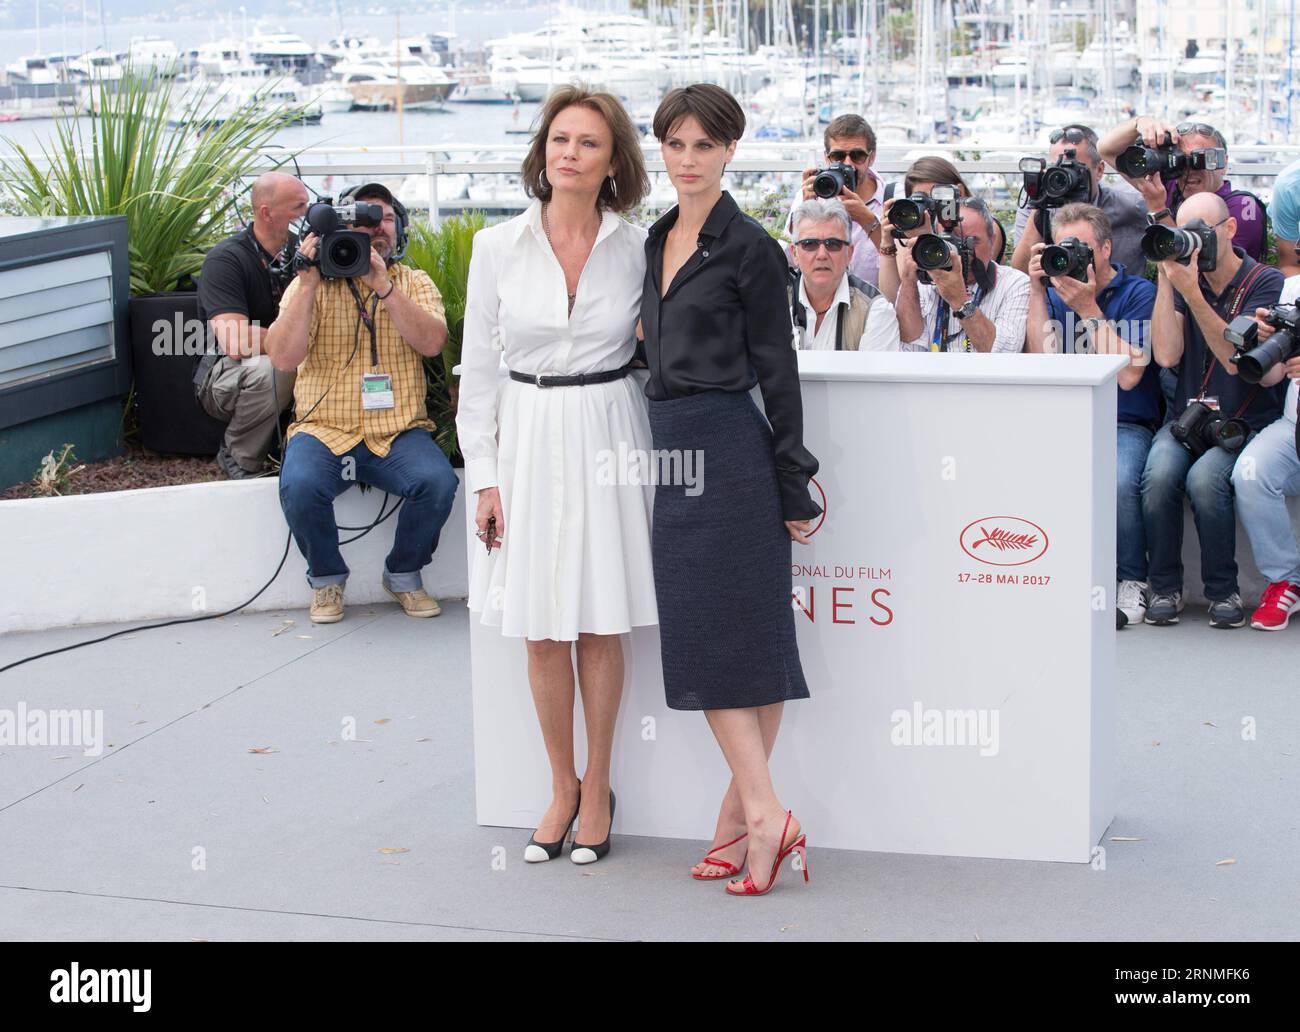 (170526) -- CANNES, May 26, 2017 -- French actresses Marine Vacth (R) and British actress Jacqueline Bisset pose for the photocall of the film Amant Double (The Double Lover) during the 70th annual Cannes Film Festival at Palais des Festivals in Cannes, France, on May 26, 2017. )(yk) FRANCE-CANNES-70TH CANNES FILM FESTIVAL-IN COMPETITION-AMANT DOUBLE-PHOTOCALL XuxJinquan PUBLICATIONxNOTxINxCHN   Cannes May 26 2017 French actresses Navy Vacth r and British actress Jacqueline Bisset Pose for The photo call of The Film Amant Double The Double Lover during The 70th Annual Cannes Film Festival AT P Stock Photo